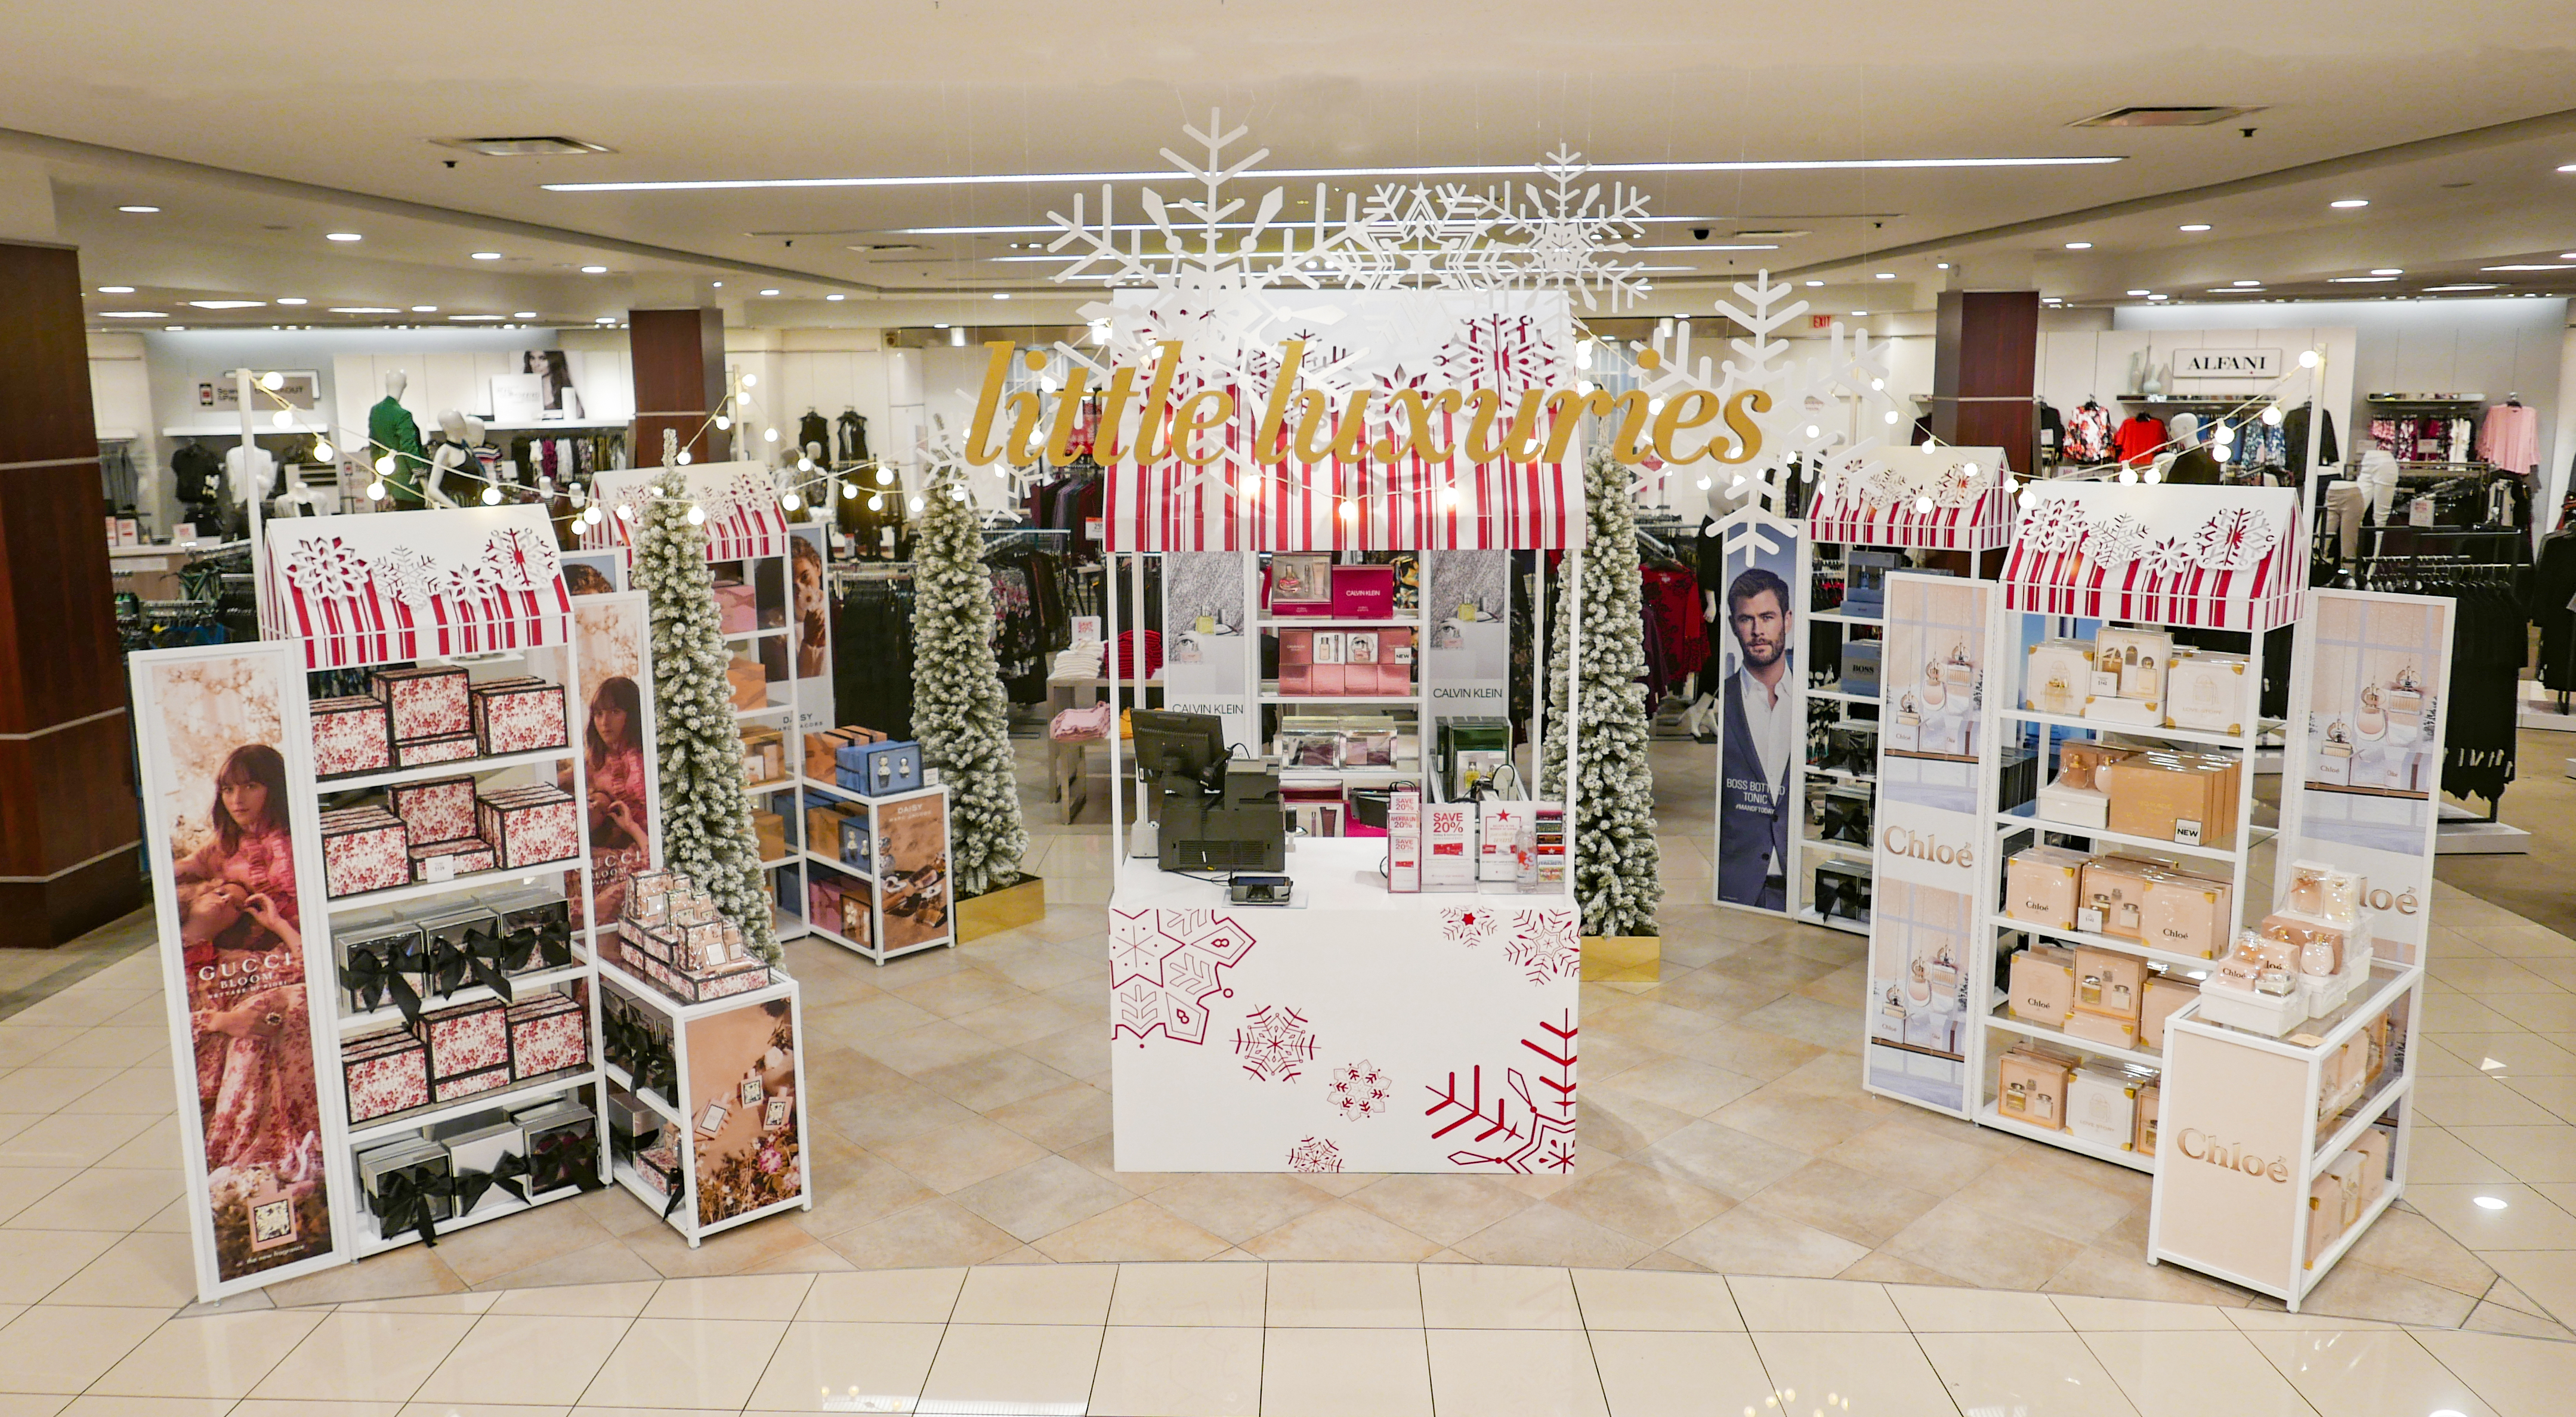 Macy's Adding 20 Claire's Store-in-Store Locations 